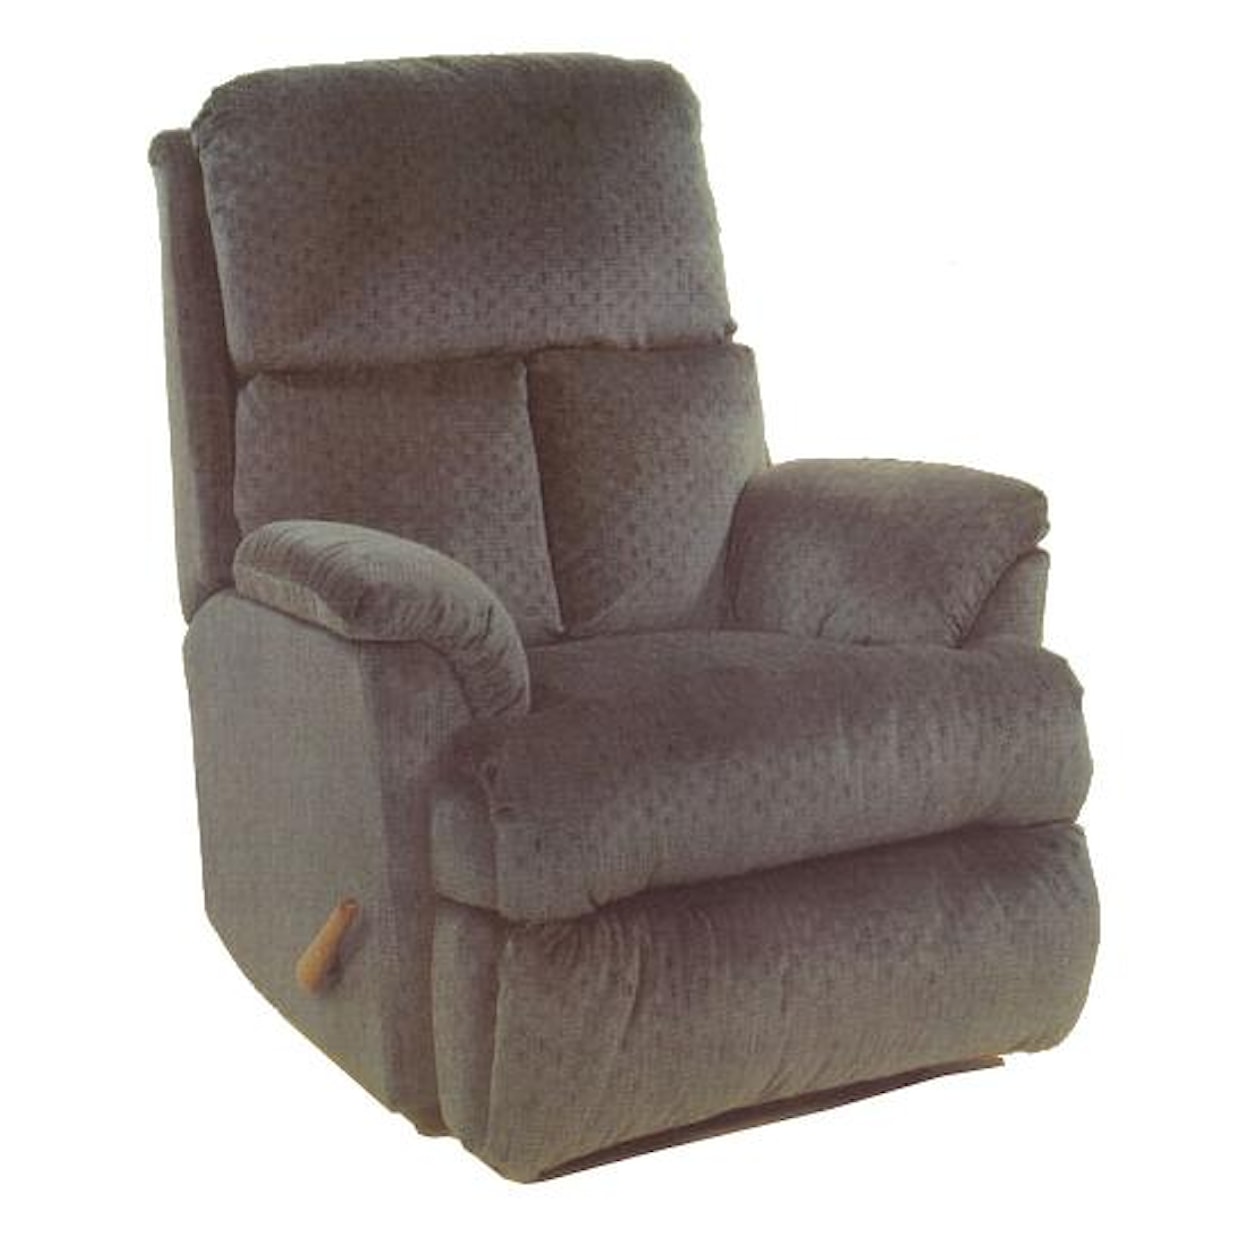 Ort Manufacturing Handle Recliner Chaise Rocker Recliner